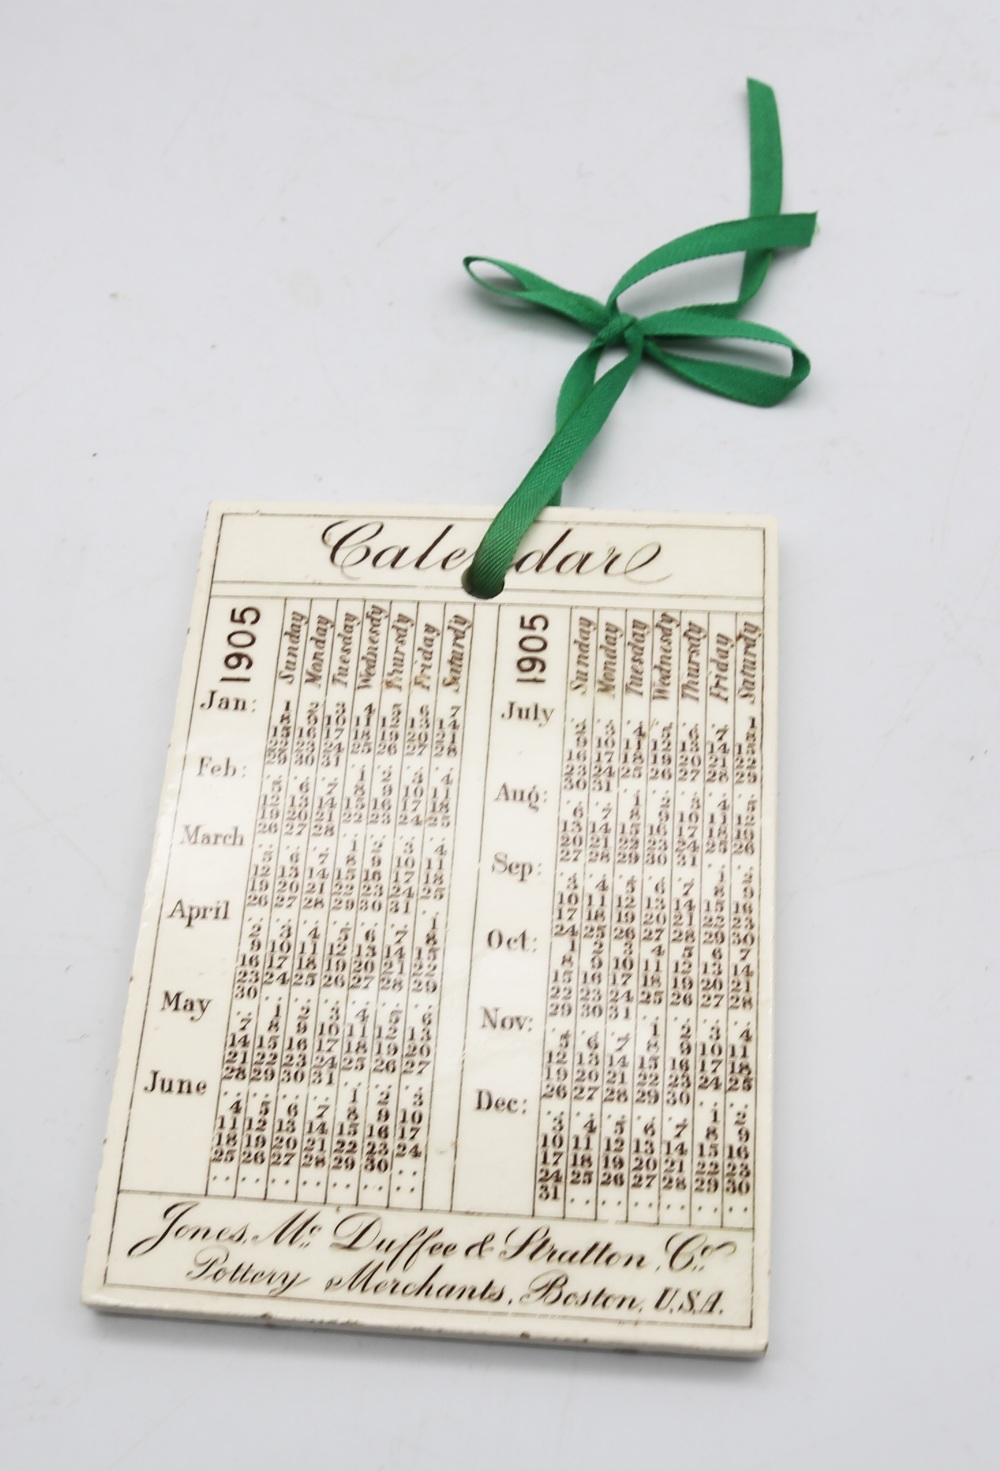 A novelty Jones Mc Duffee & Stratton Co pottery calendar with transfer printed George Stephenson's - Image 5 of 6